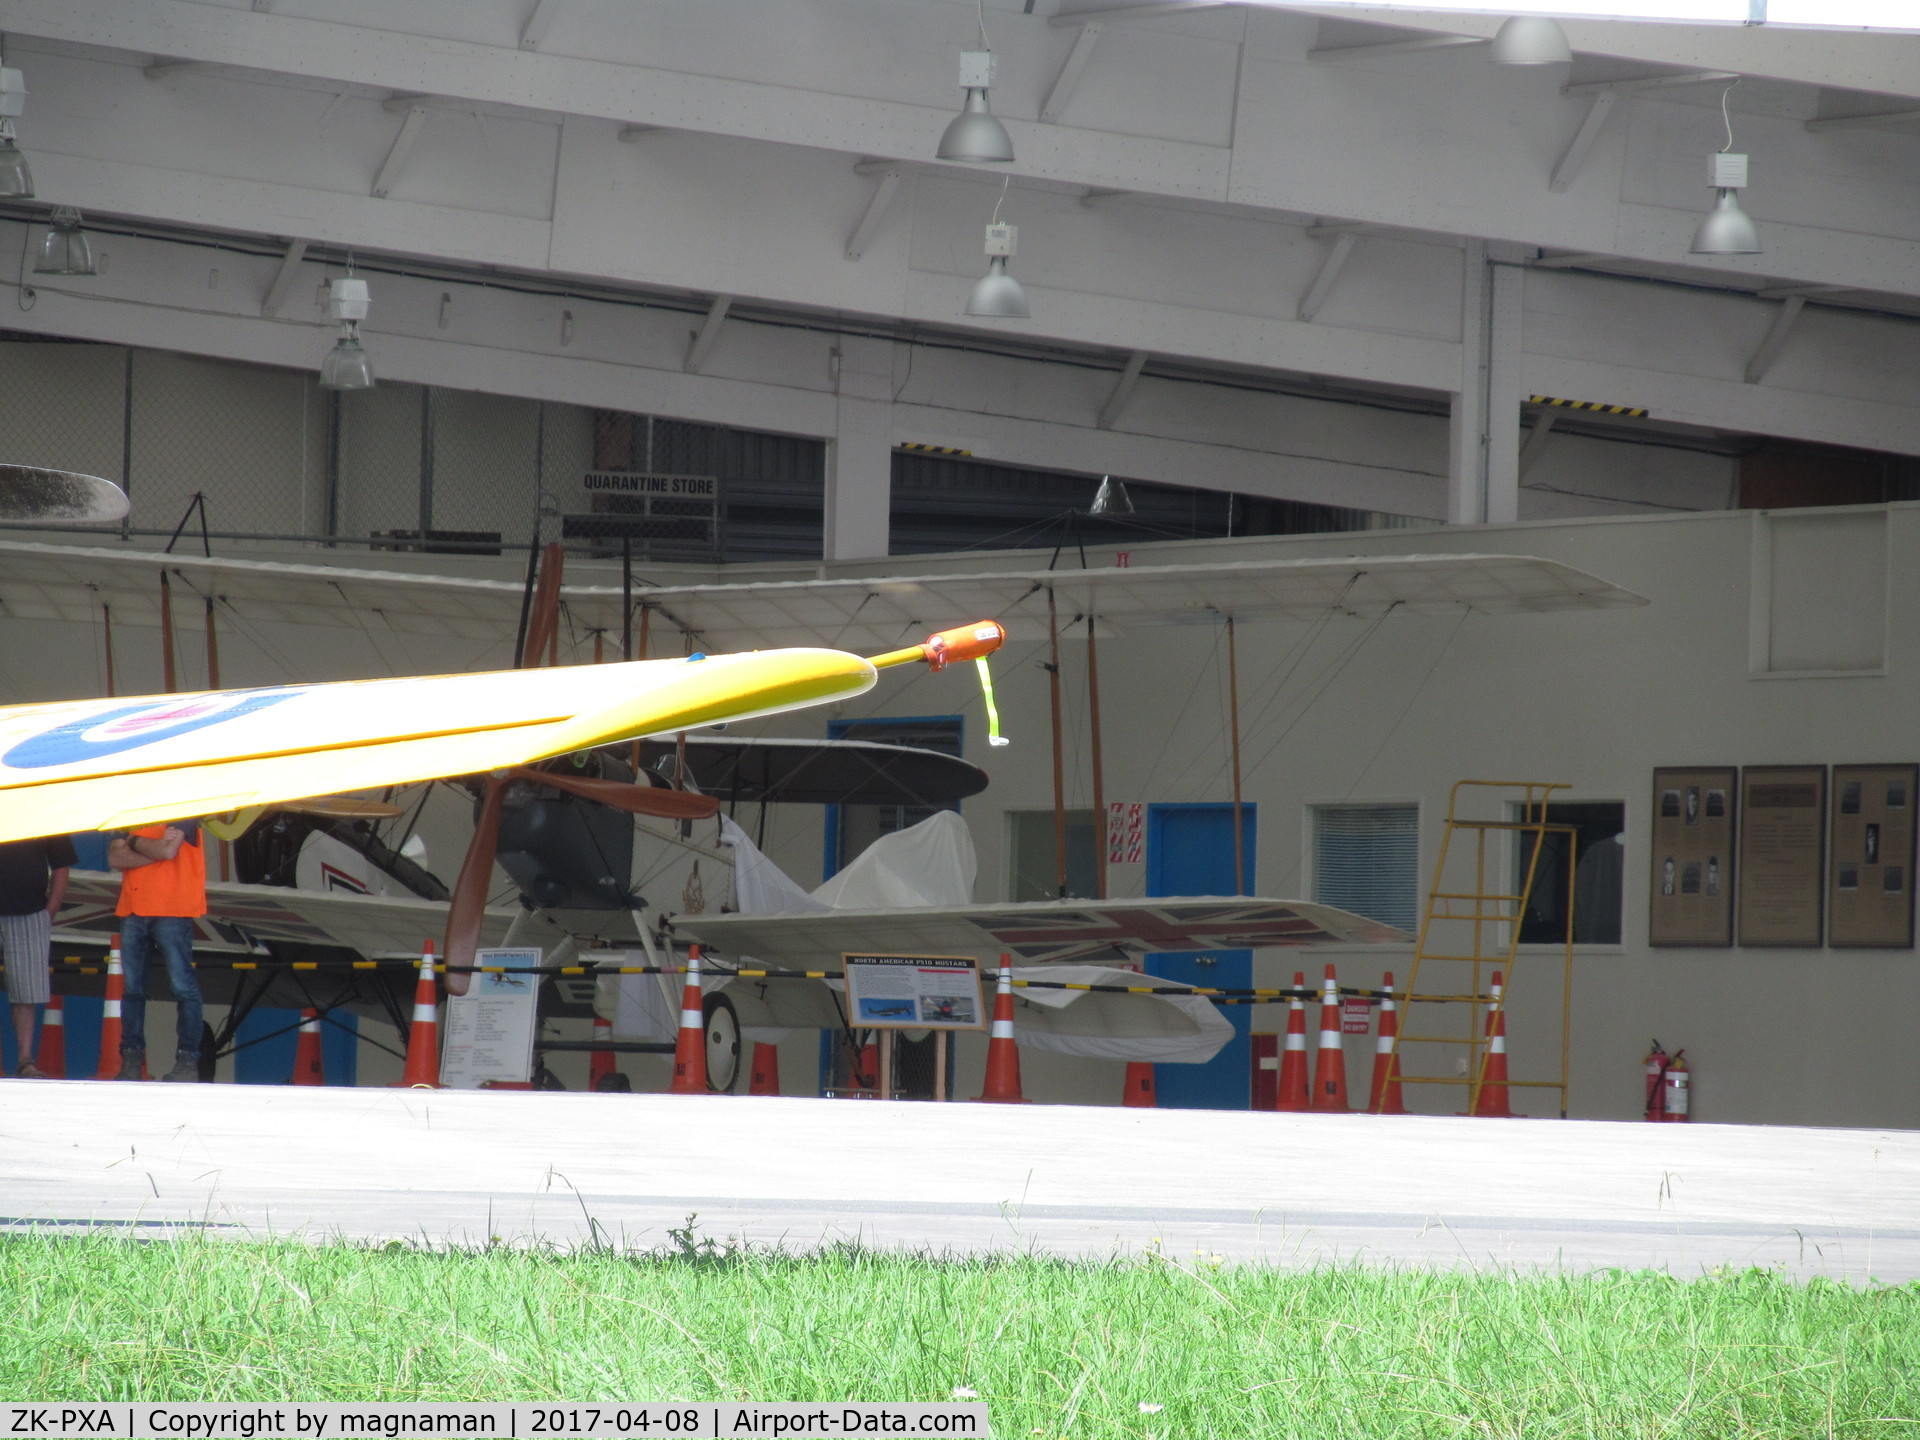 ZK-PXA, The Vintage Aviator BE2e-1 C/N 11233, Hiding in new home of warbirds hangar